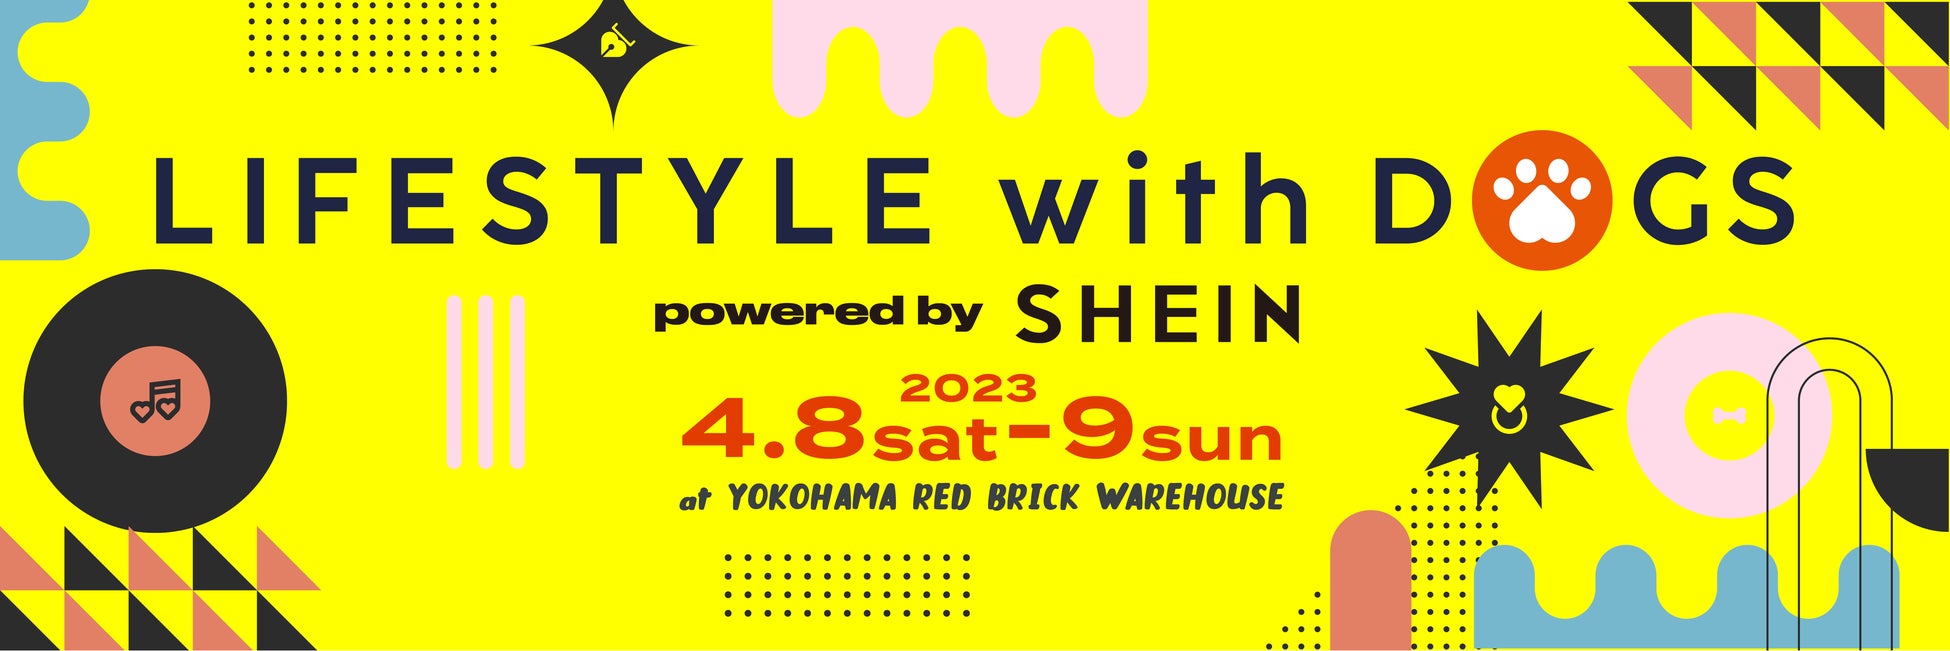 LIFESTYLE with DOGS powered by SHEIN開催決定